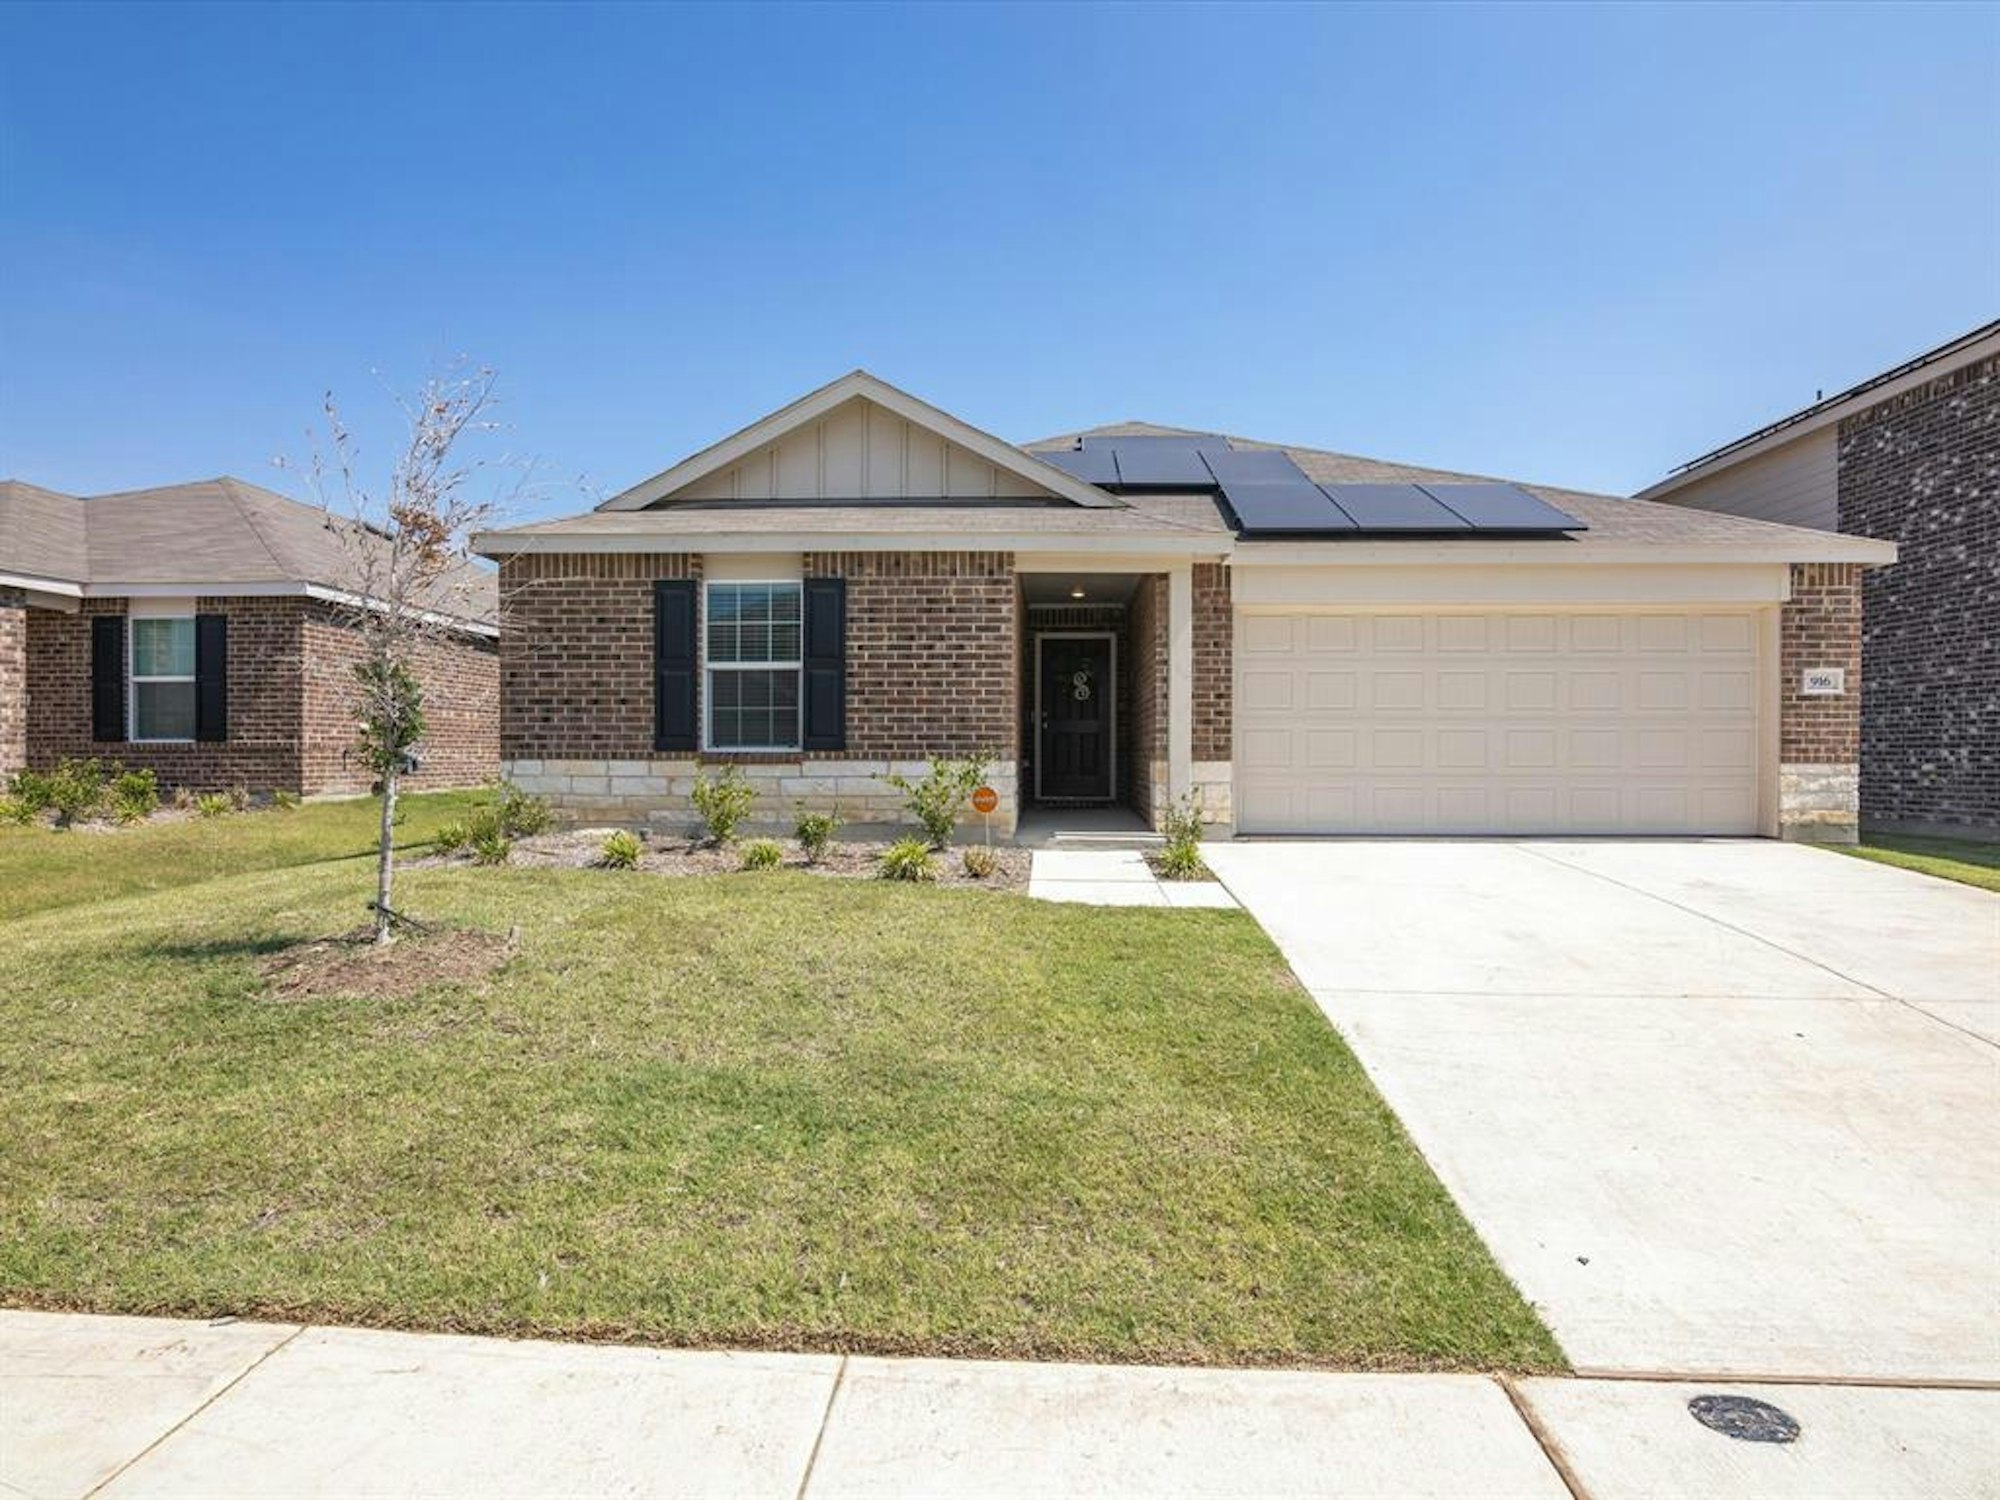 Photo 1 of 27 - 916 Shire Ave, Haslet, TX 76052